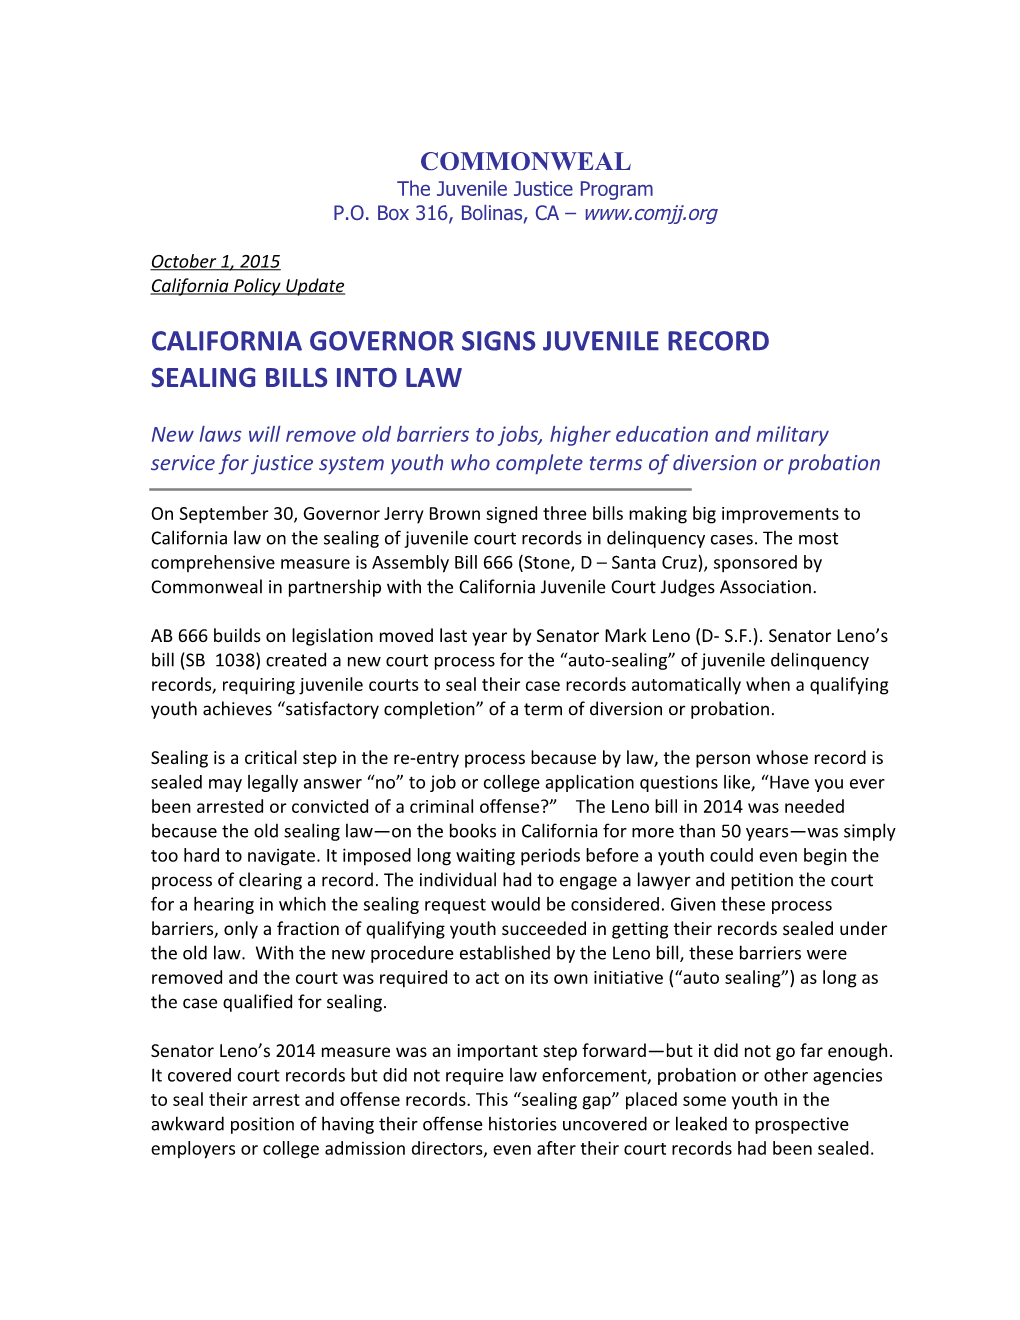 Governor Signs CA Juvenile Record Sealing Bills, Commonweal Update, Page 3